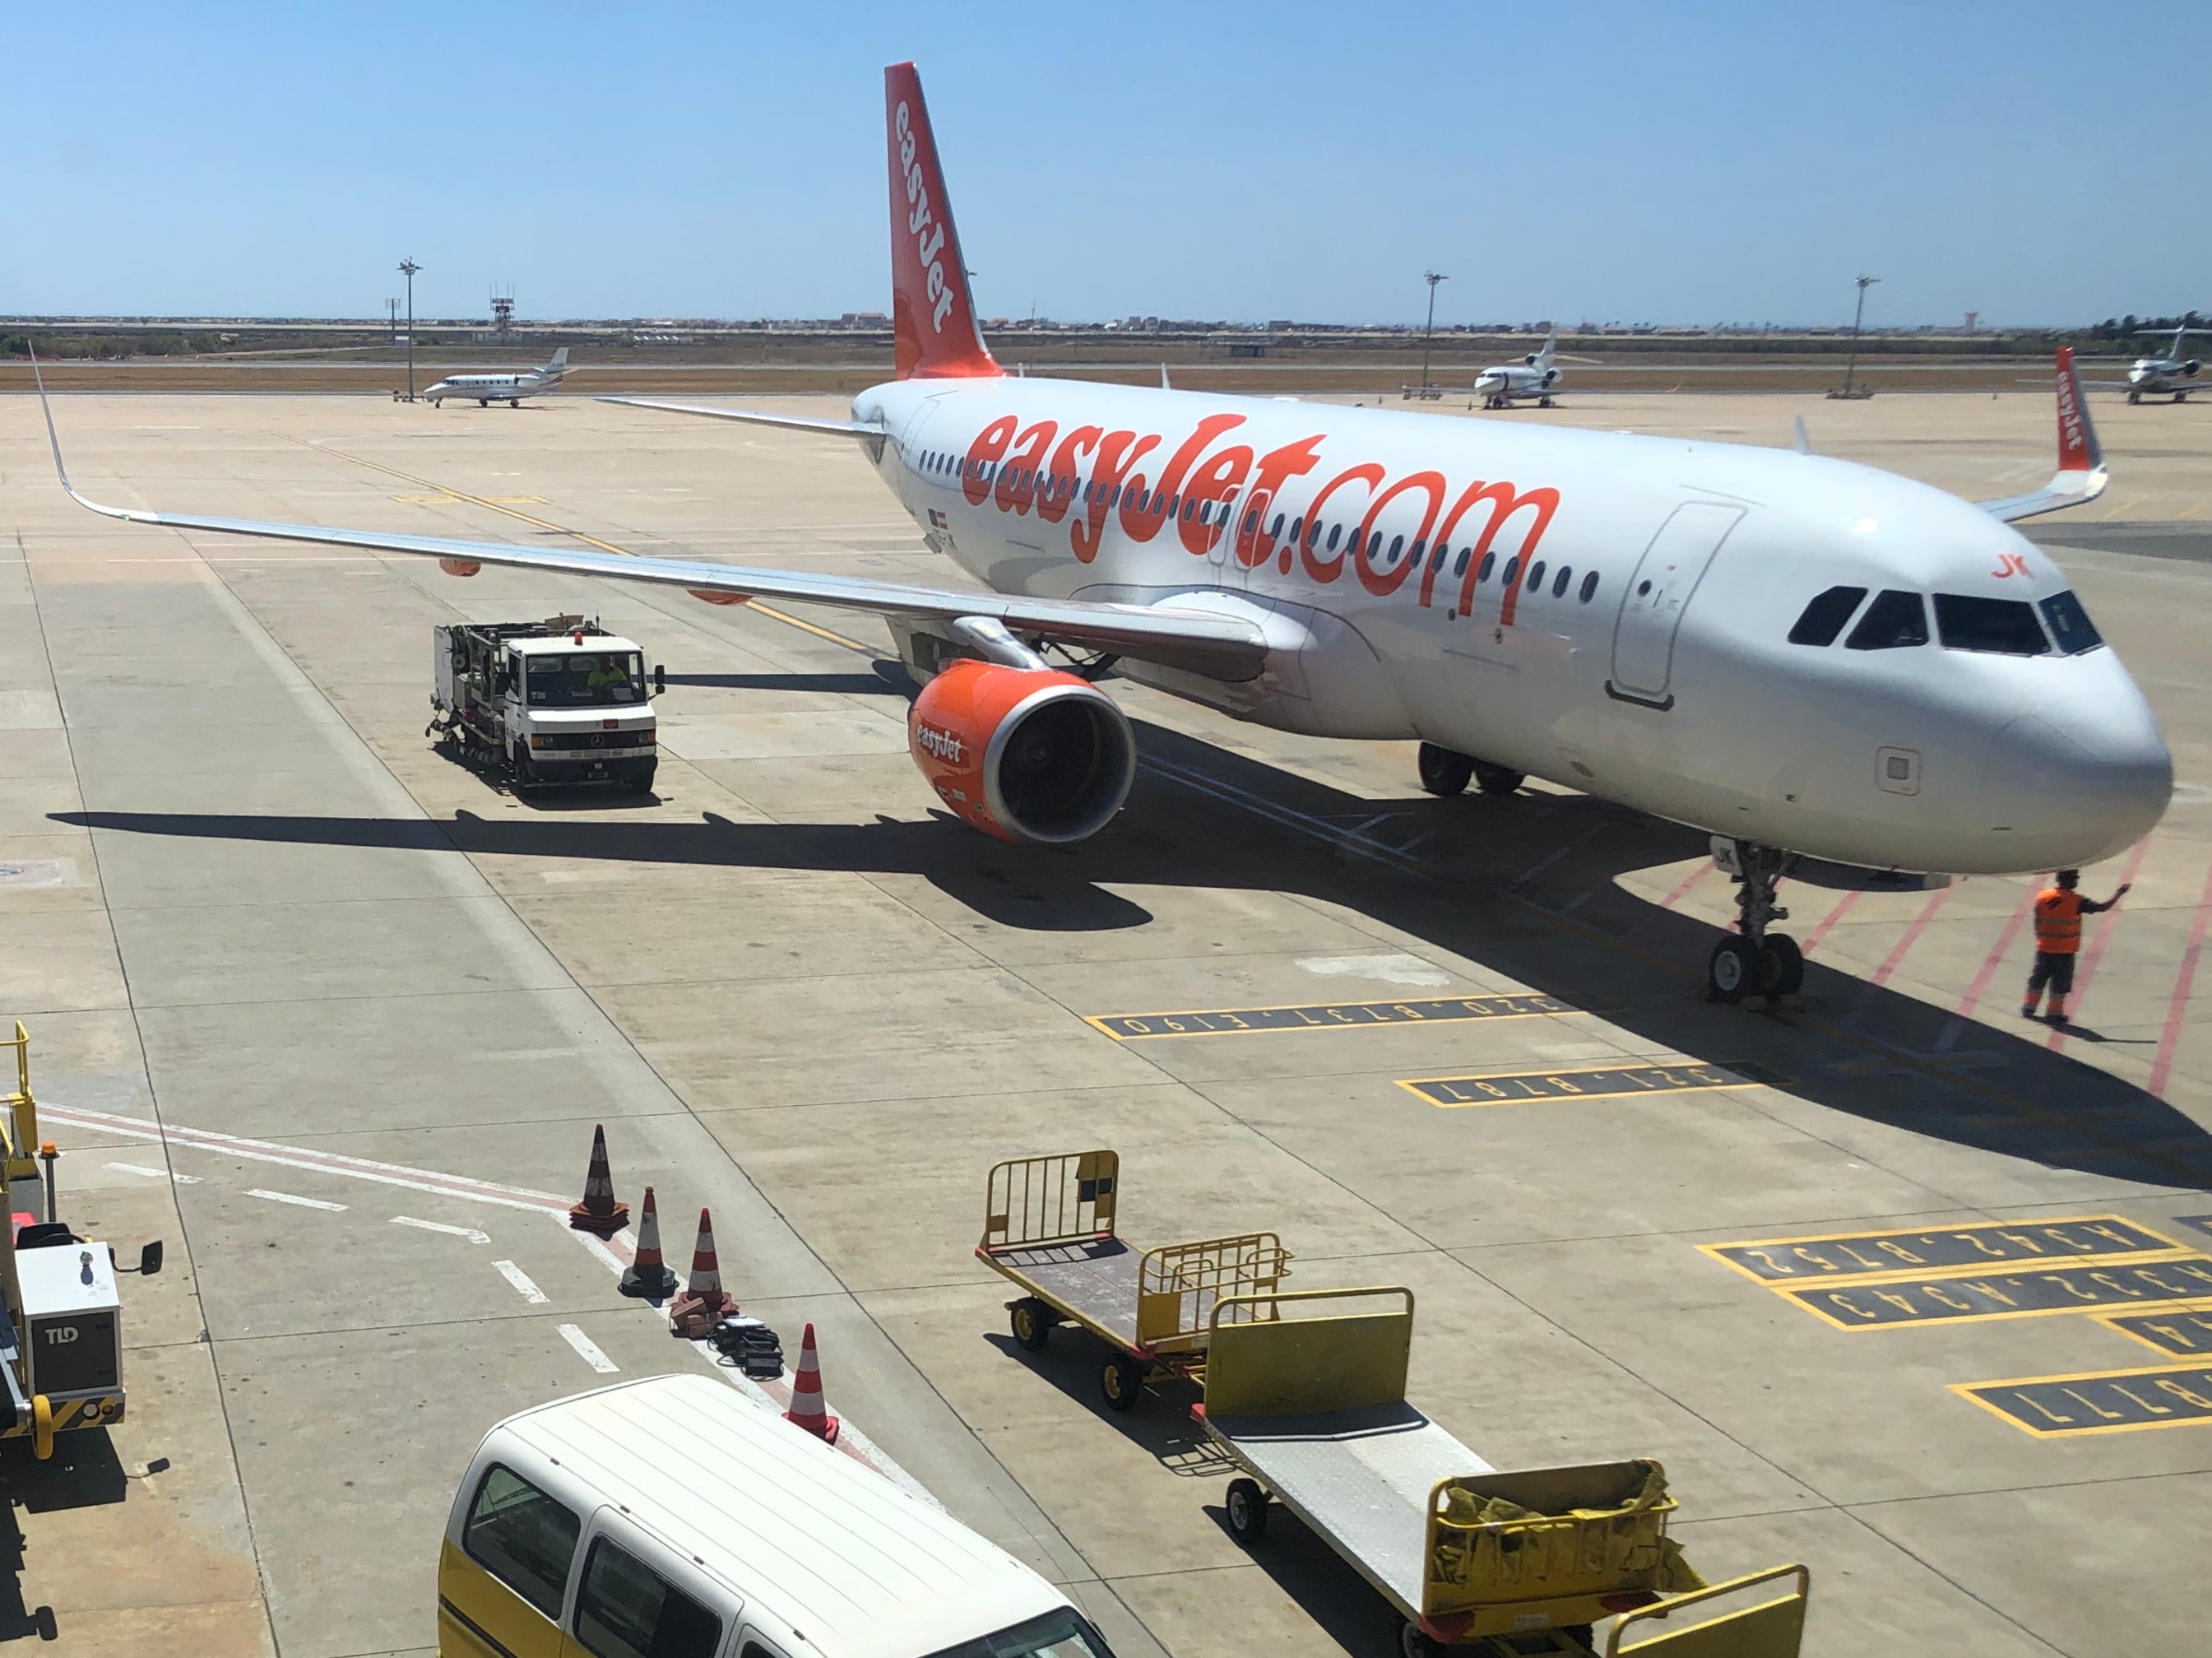 Sunny outlook: an easyJet Airbus A320 at Faro airport in Portugal